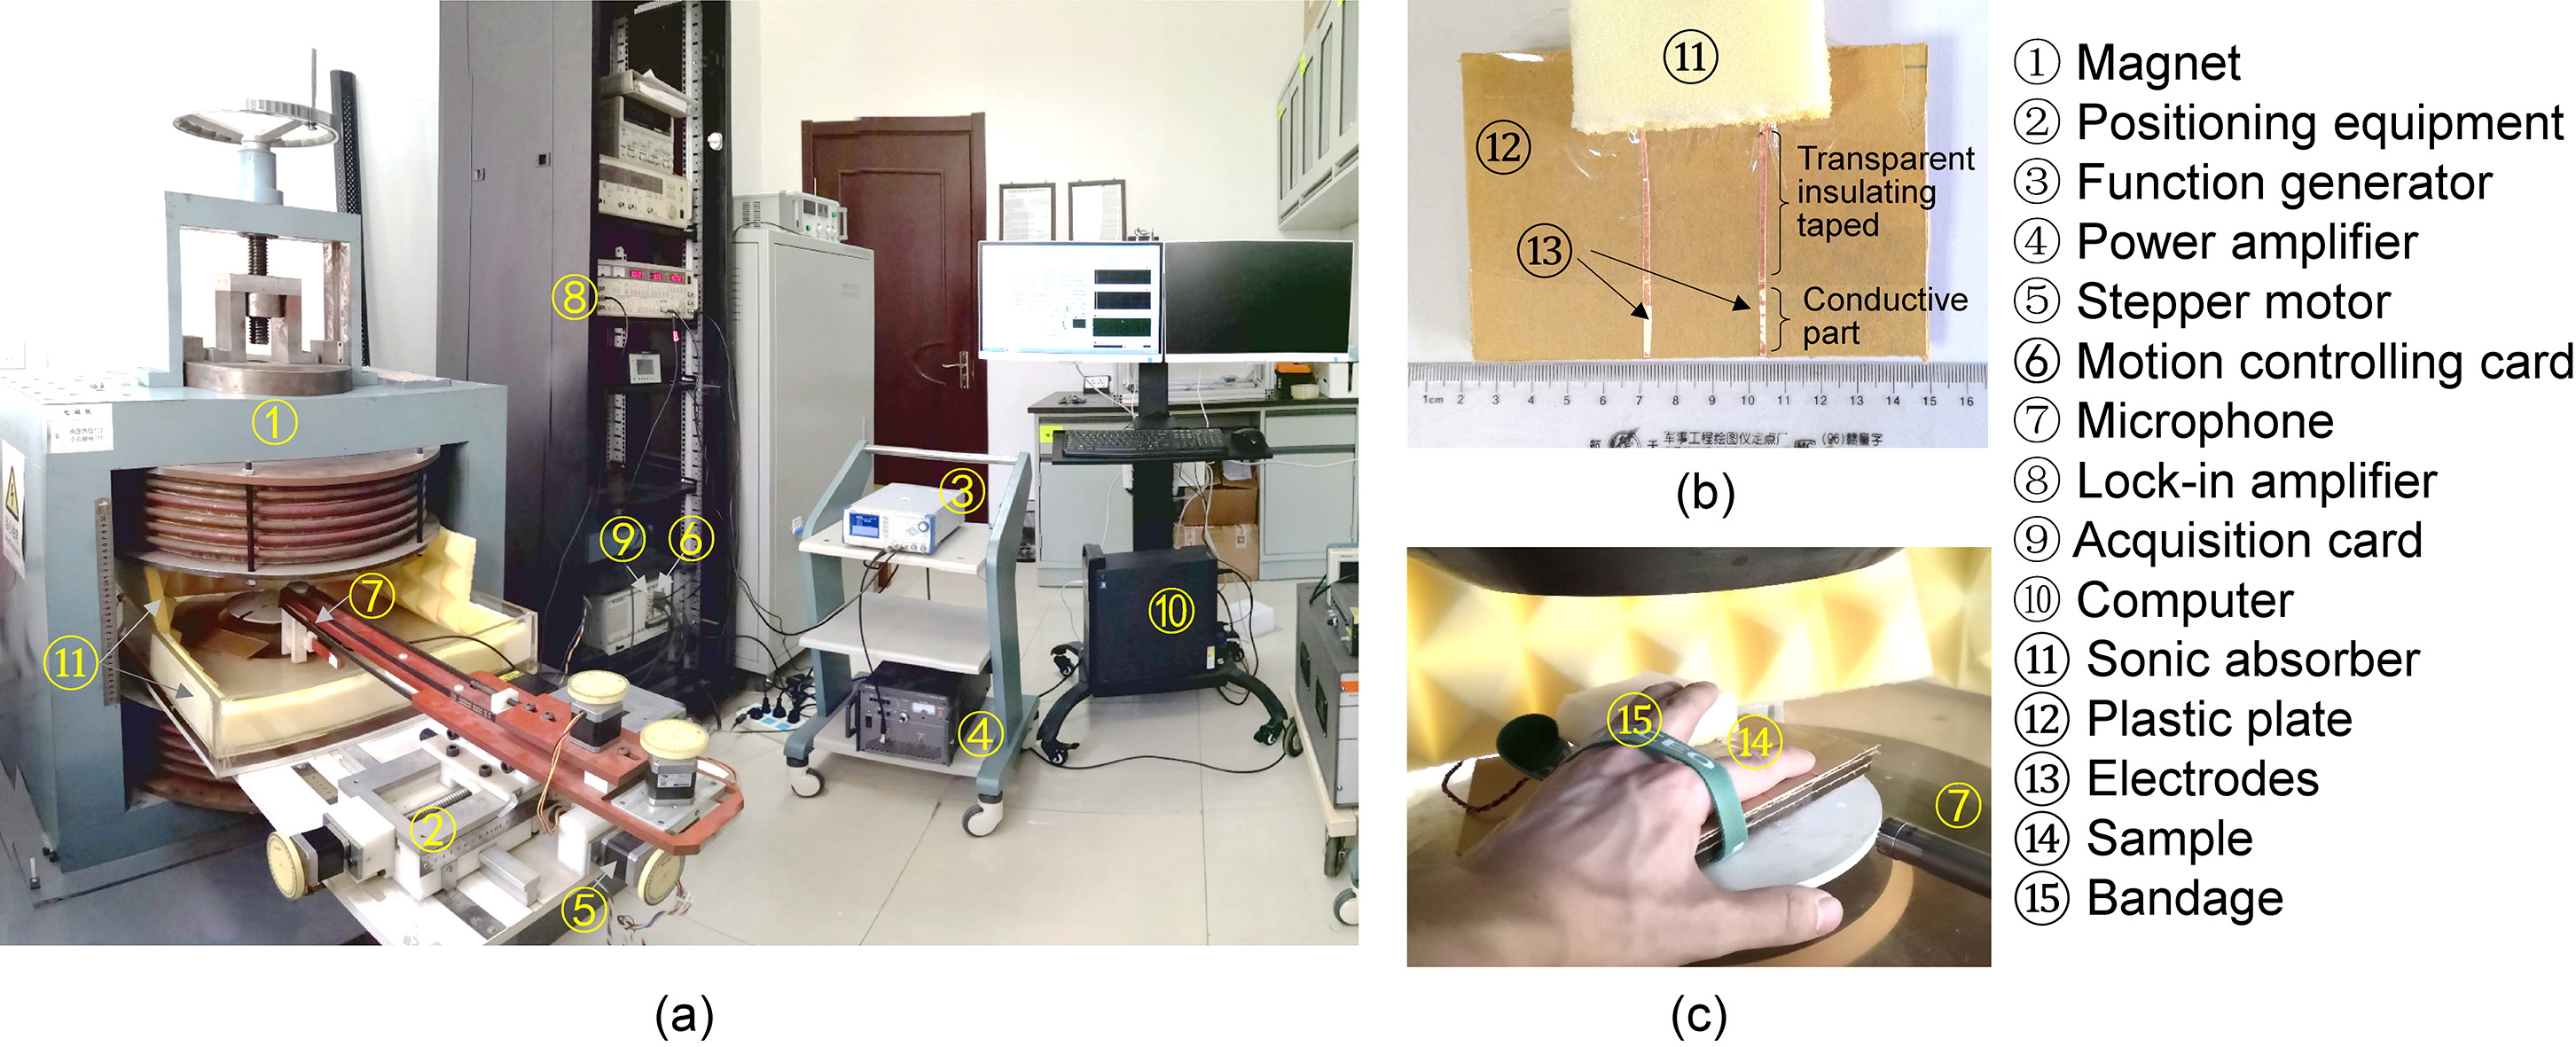 Photographs of the experimental system. (a) Experimental system. (b) Plate with electrodes. (c) Sample measurement. 